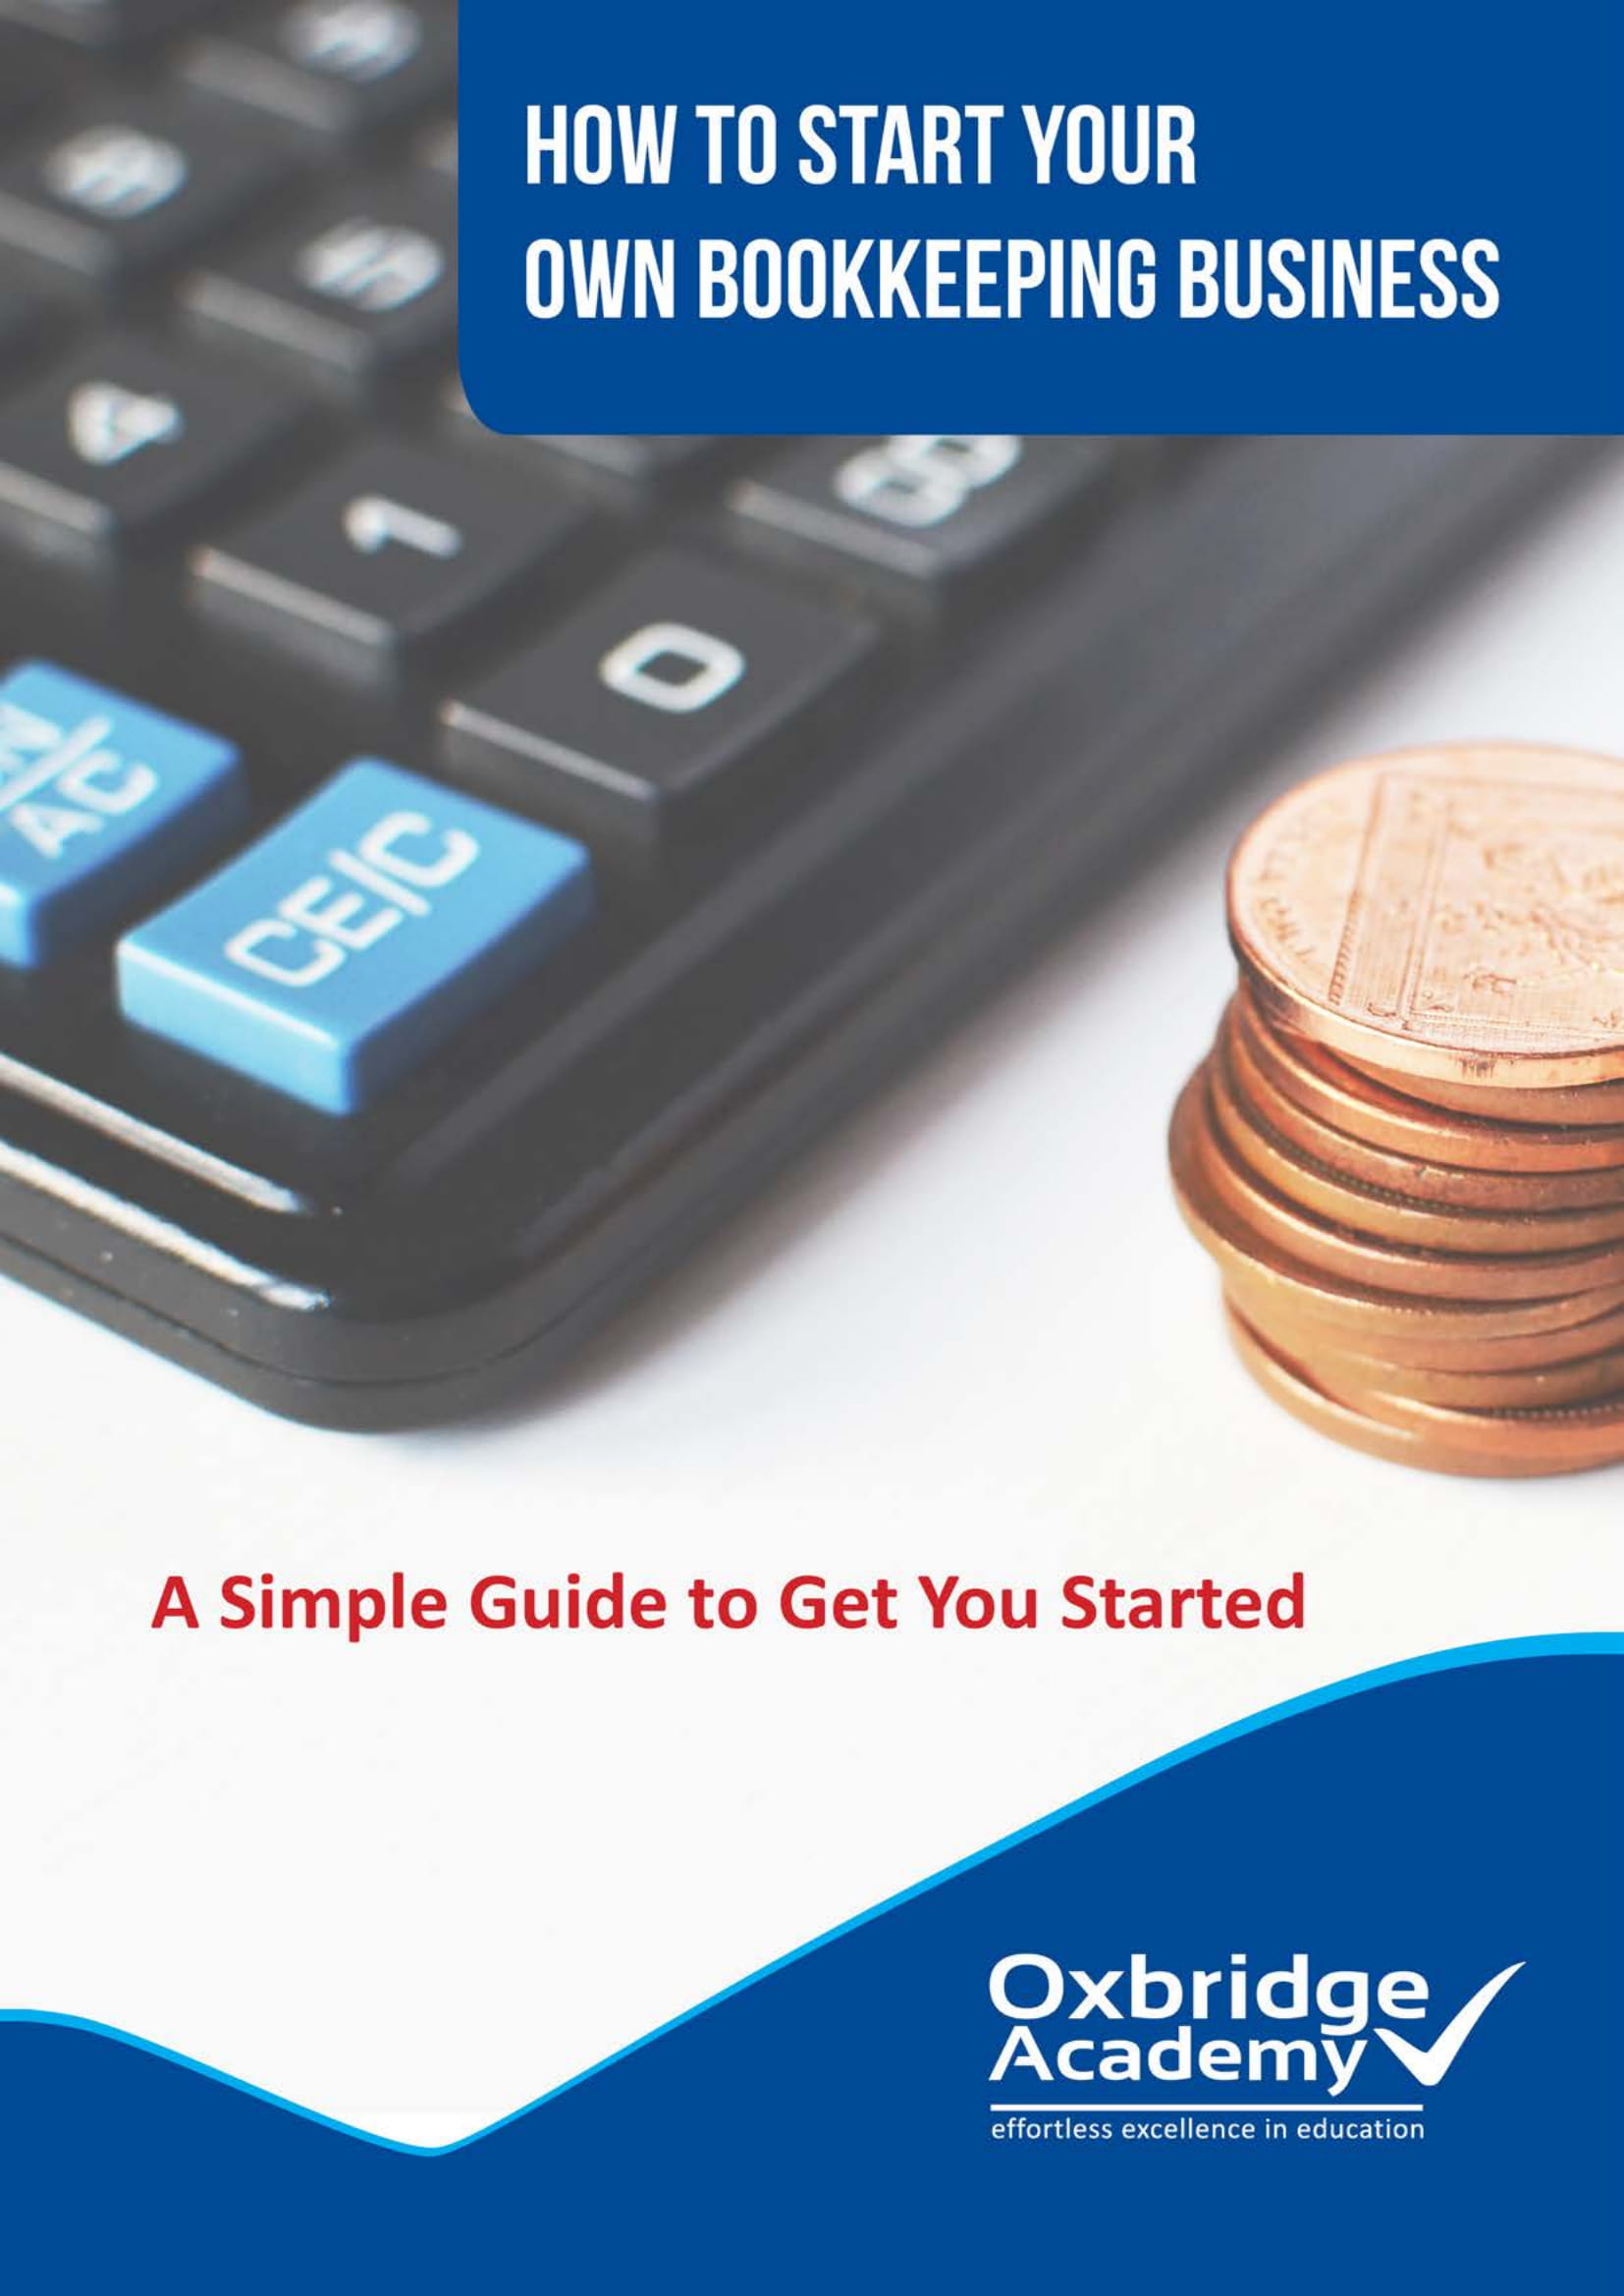 7+ Bookkeeping Business Plan Examples - PDF | Examples